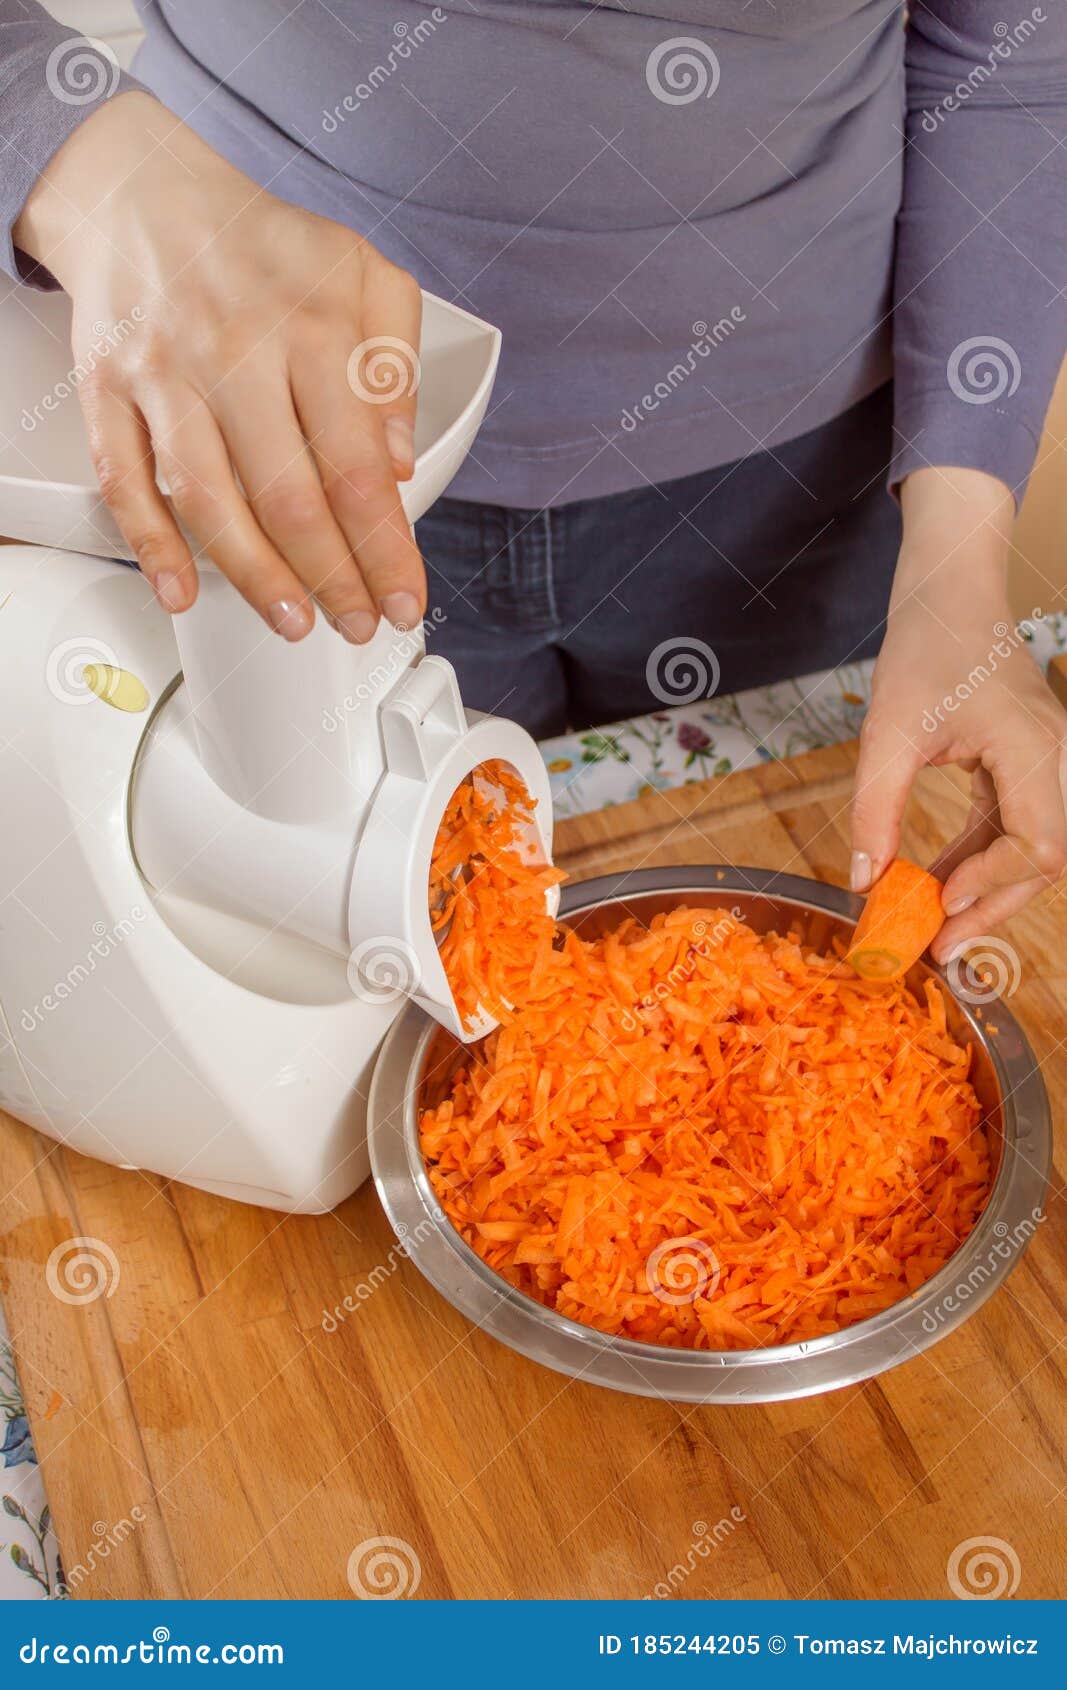 https://thumbs.dreamstime.com/z/electric-razor-attachment-cutting-vegetables-woman-cuts-carrot-small-pieces-using-electric-chopper-185244205.jpg